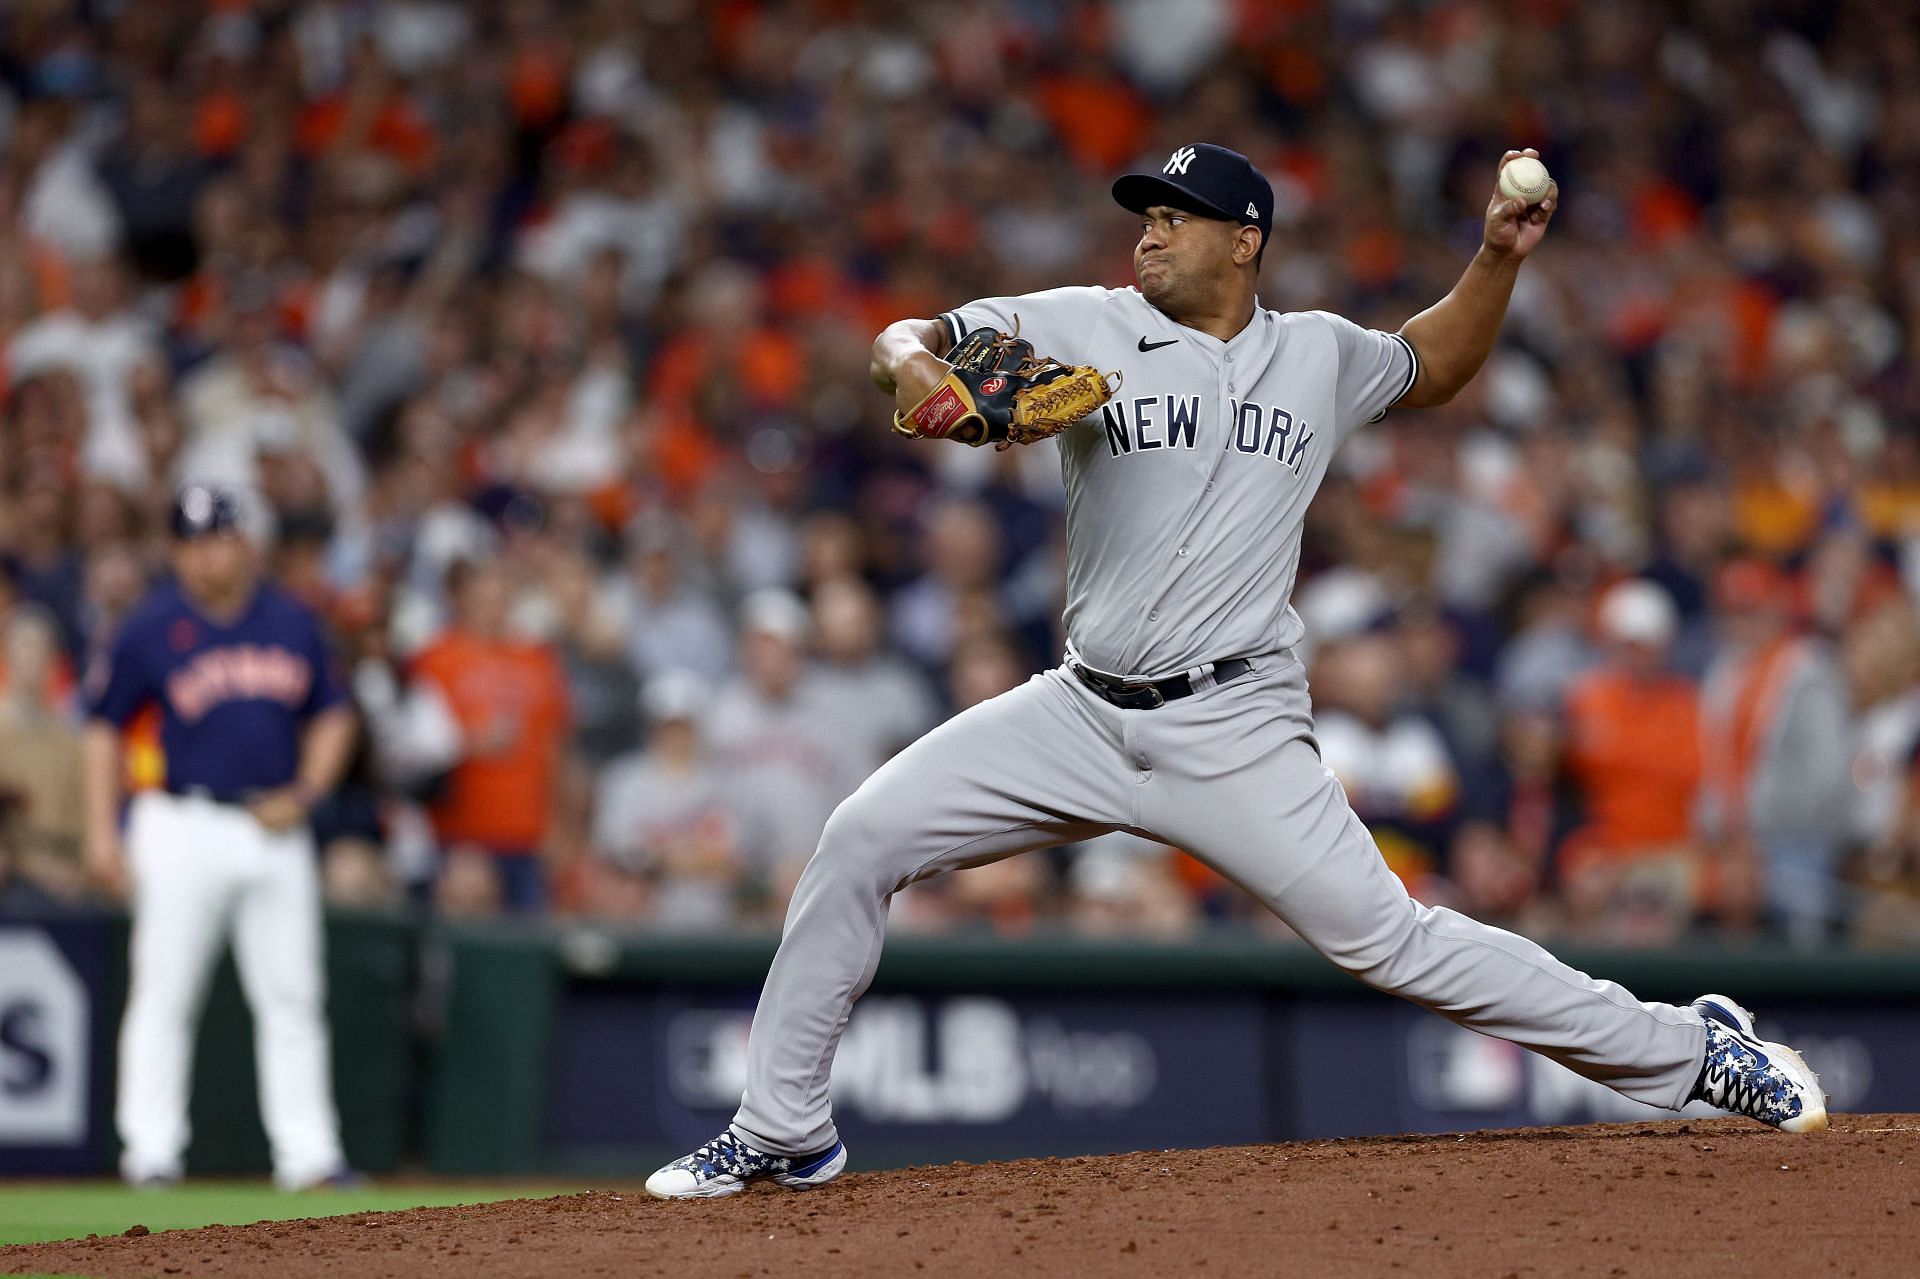 Yankees' Wandy Peralta Opens Up After Blowing Save Vs. Red Sox